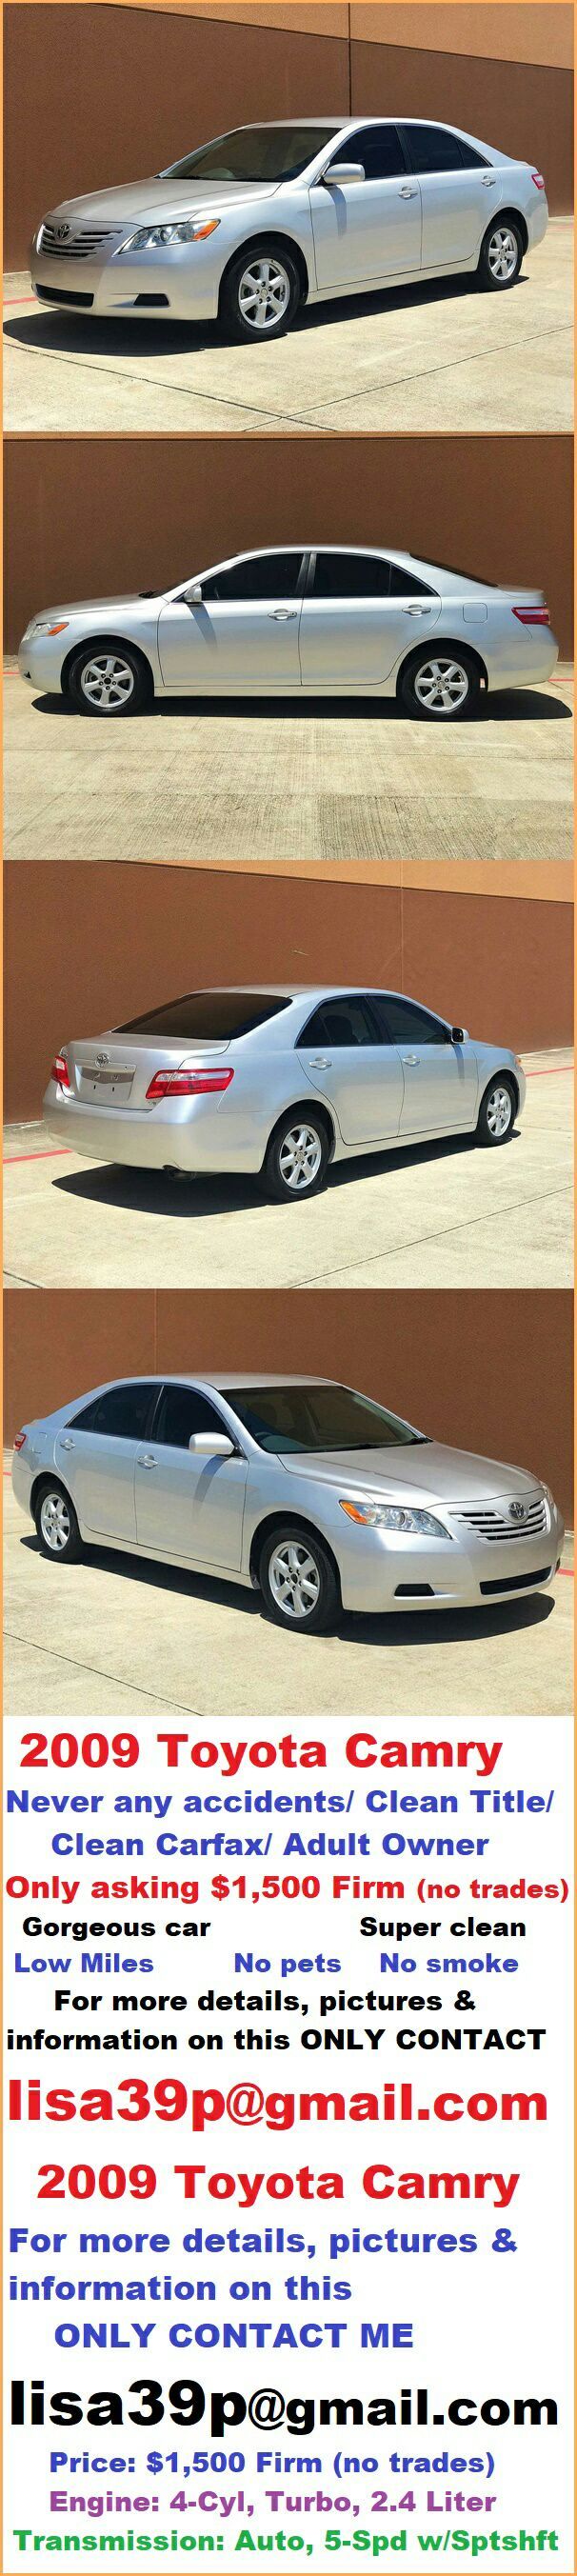 Works perfectly 2009 Toyota Camry Runs Very Good